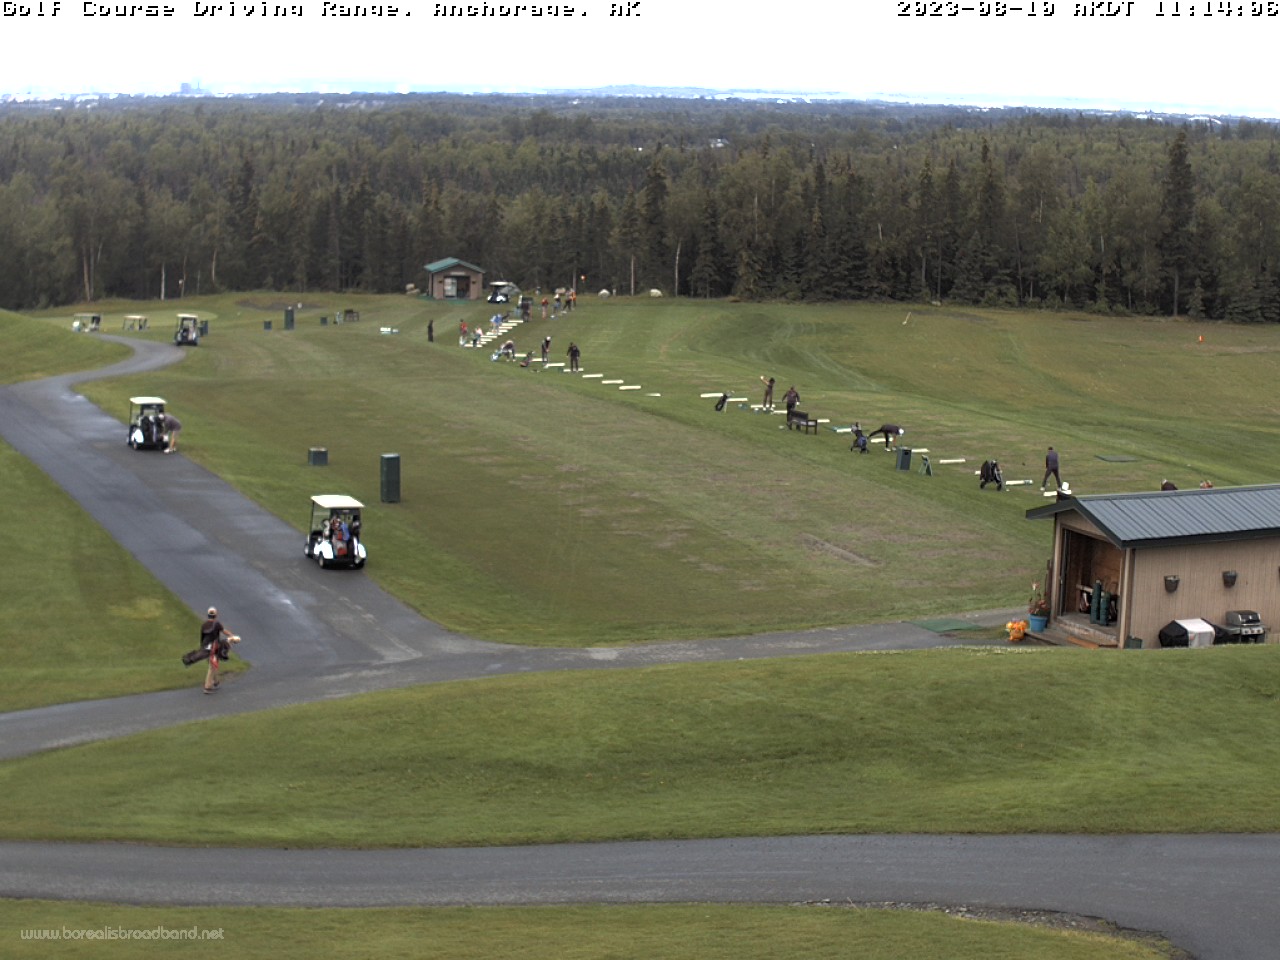 Camera image of the Anchorage golf course.